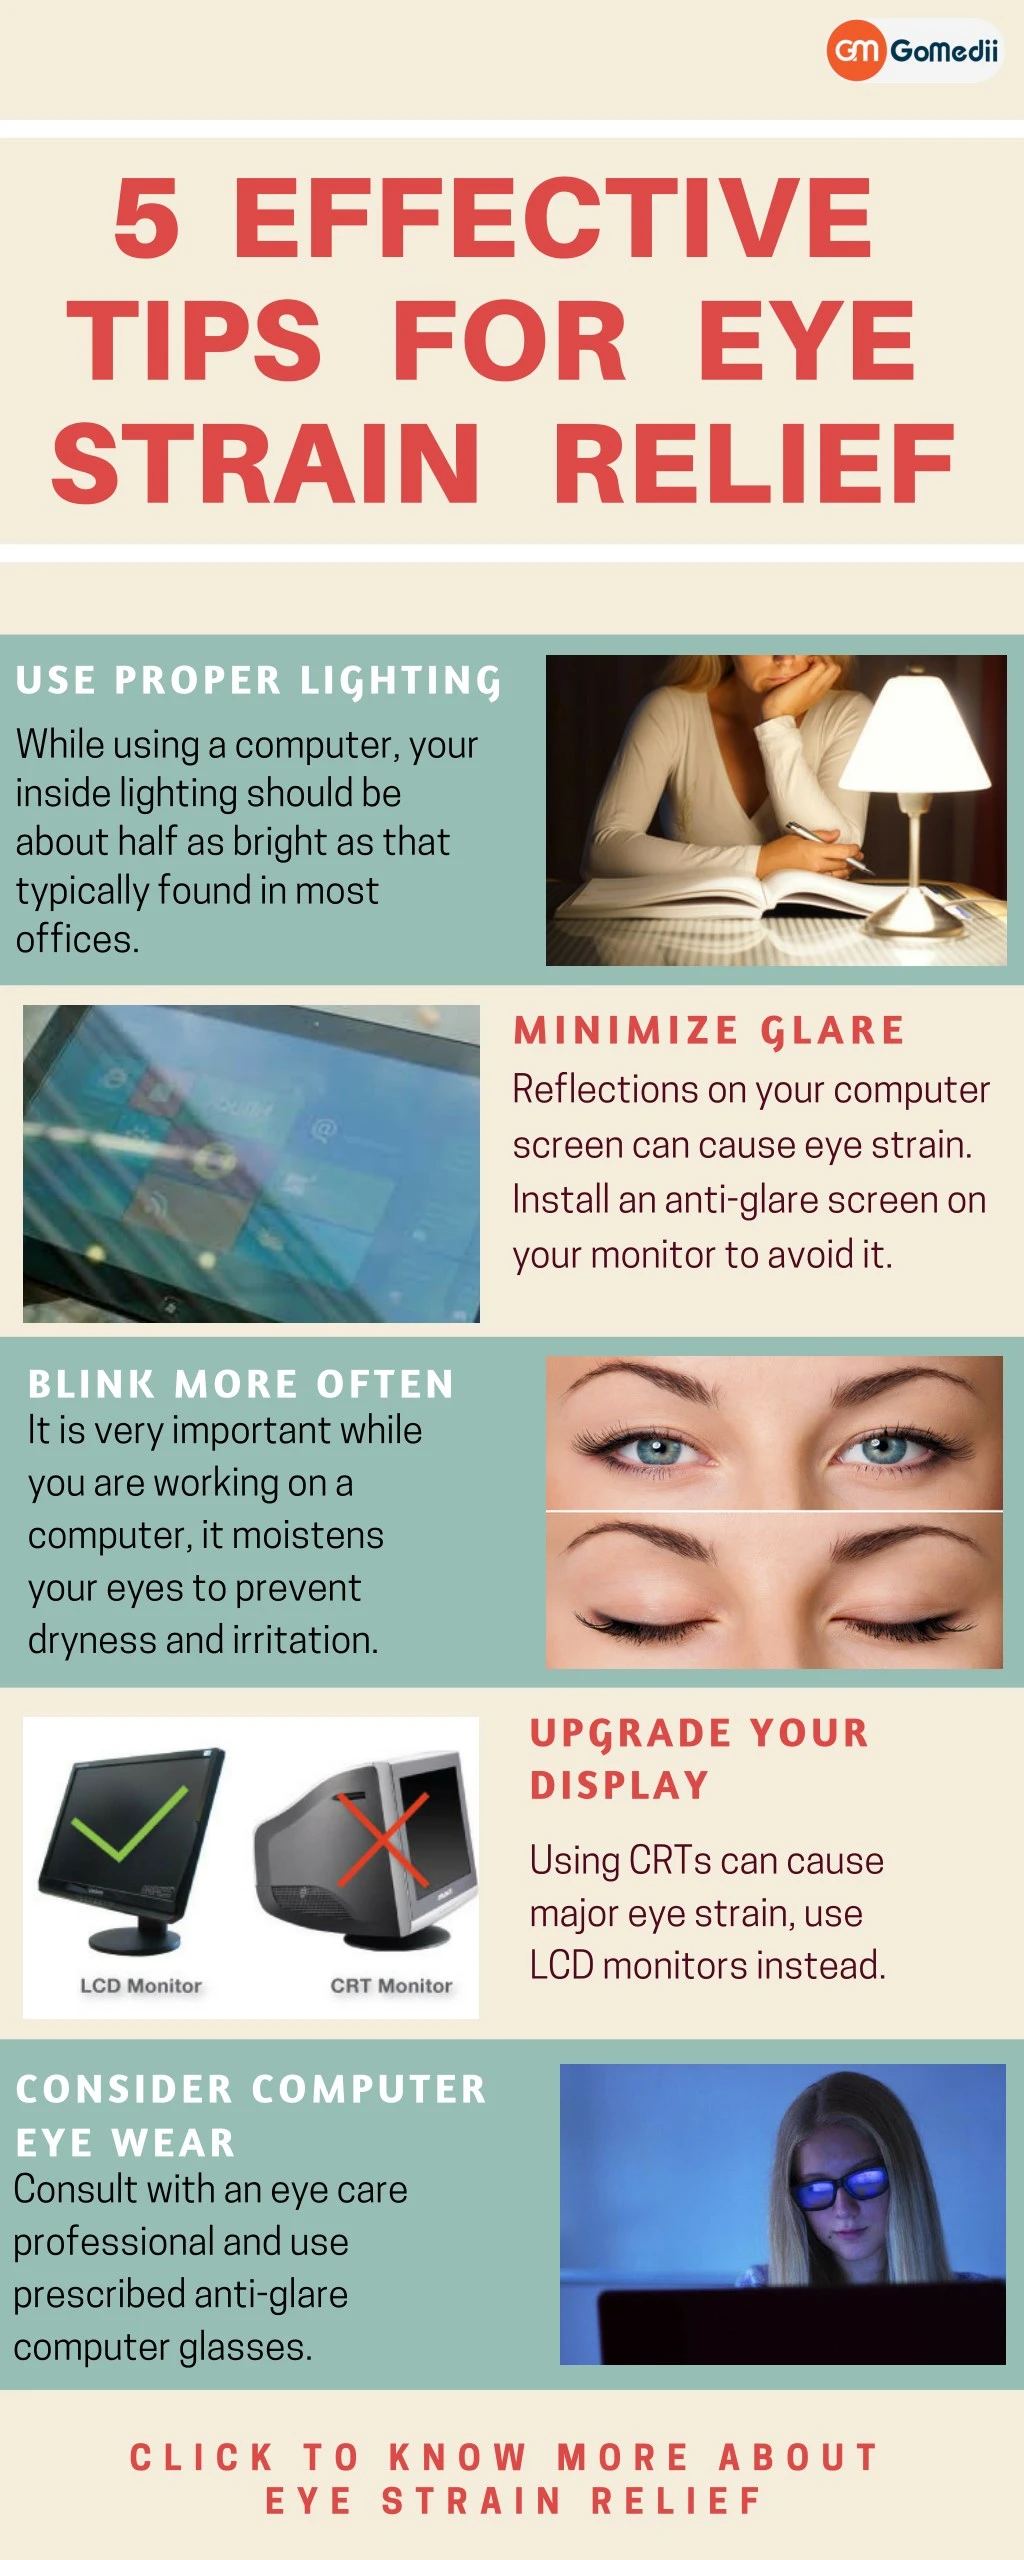 5 effective tips for eye strain relief